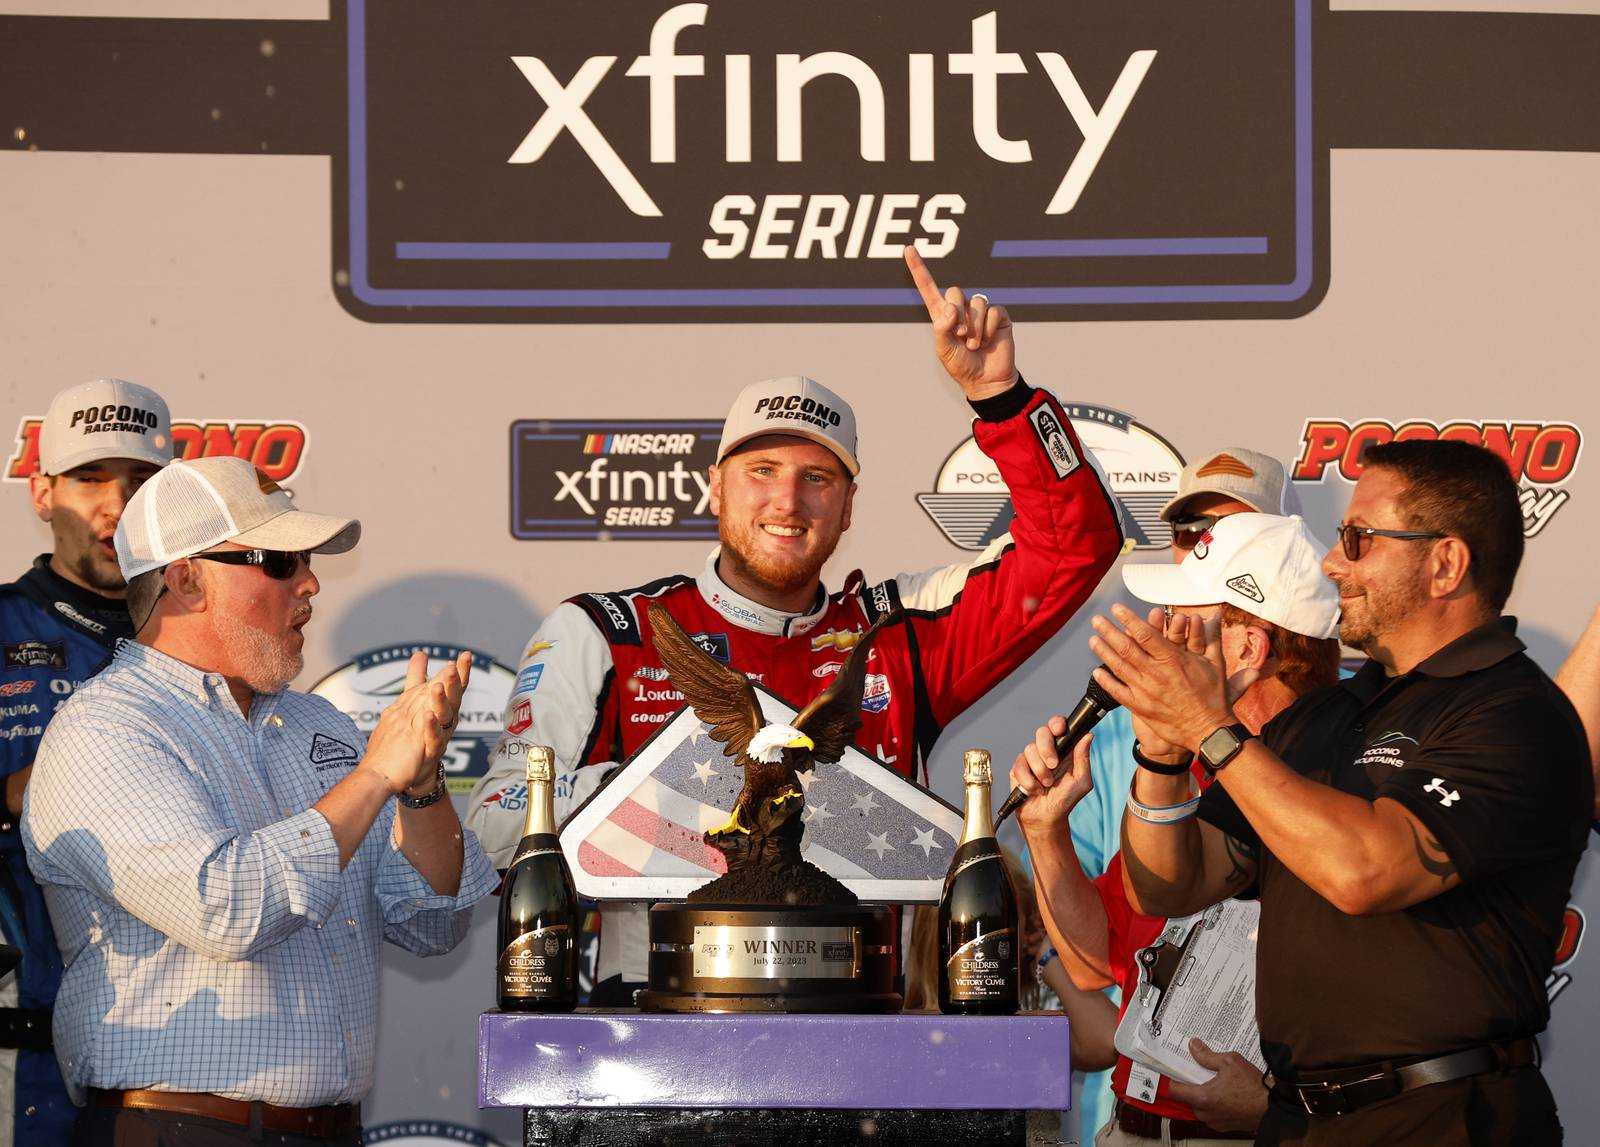 NASCAR plans to make The CW the exclusive home for Xfinity Series